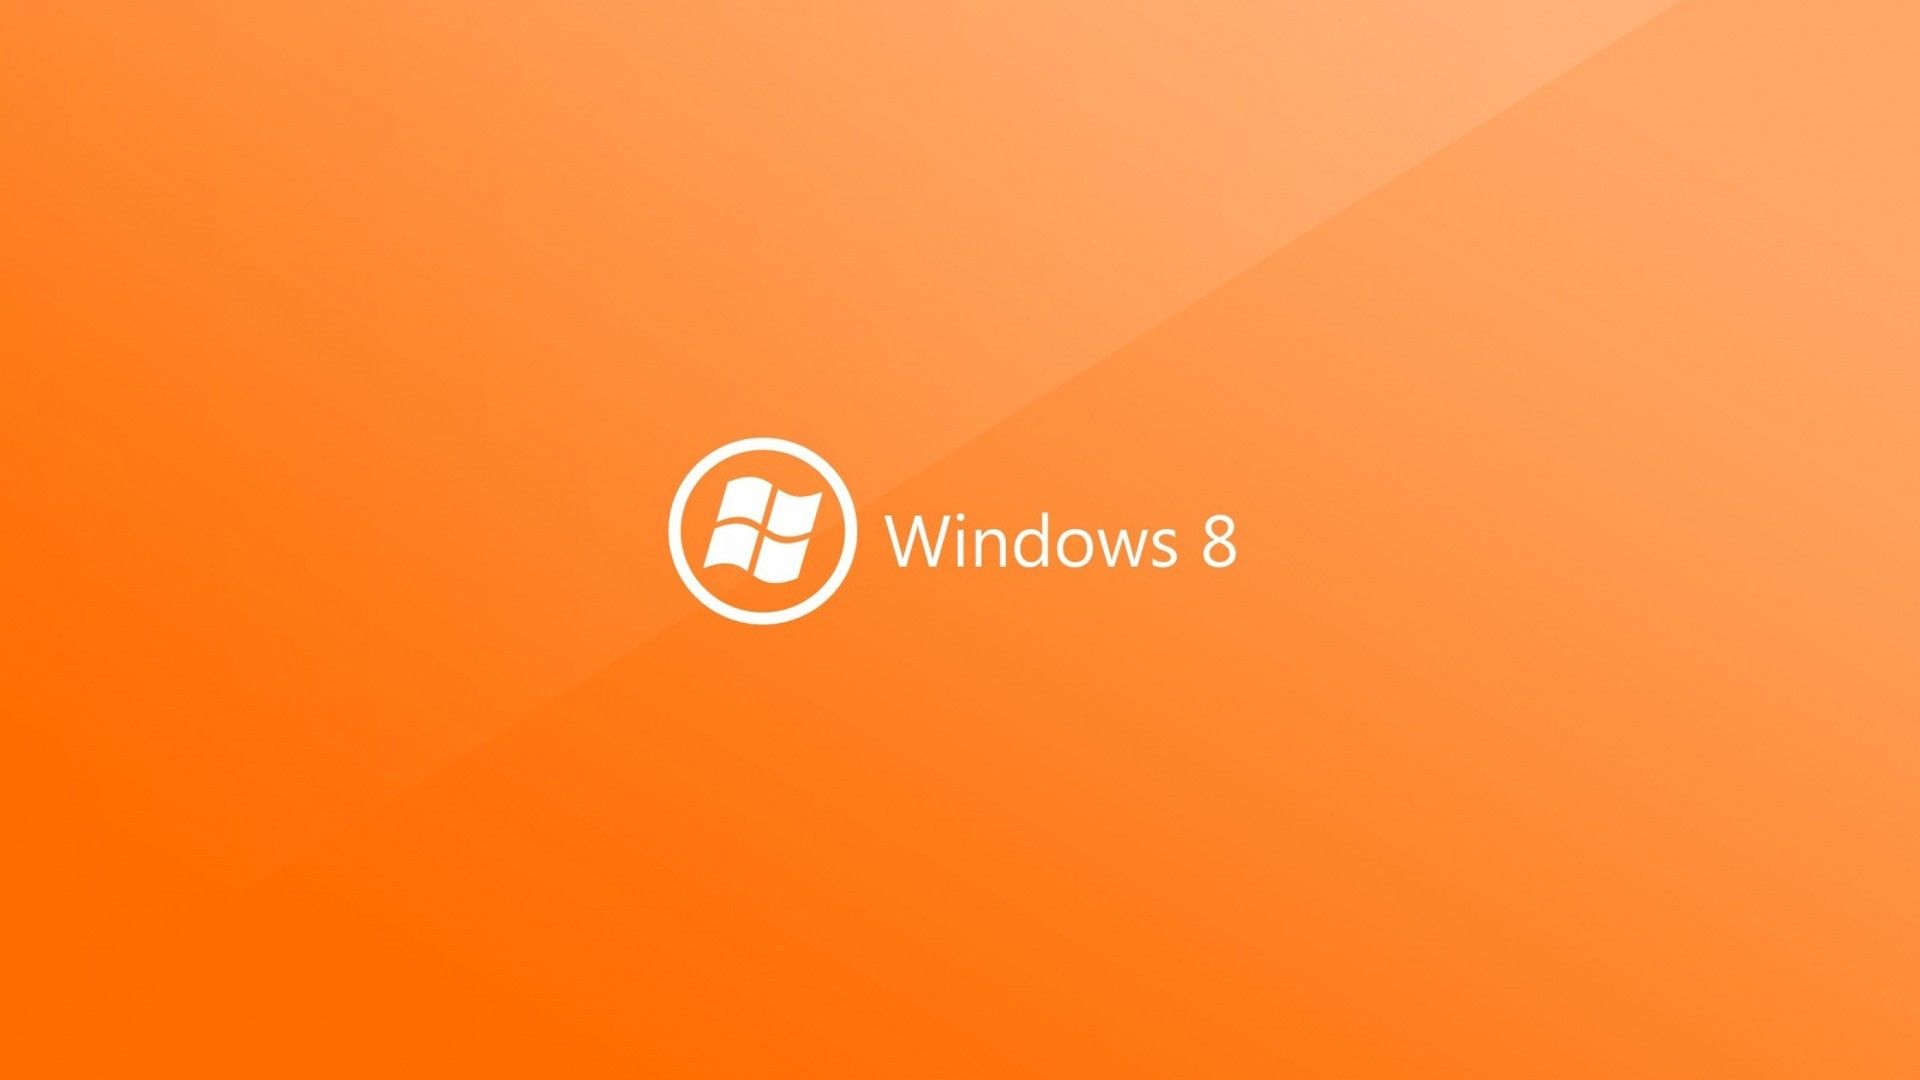 Live Wallpapers For Windows 8 Group (53+)